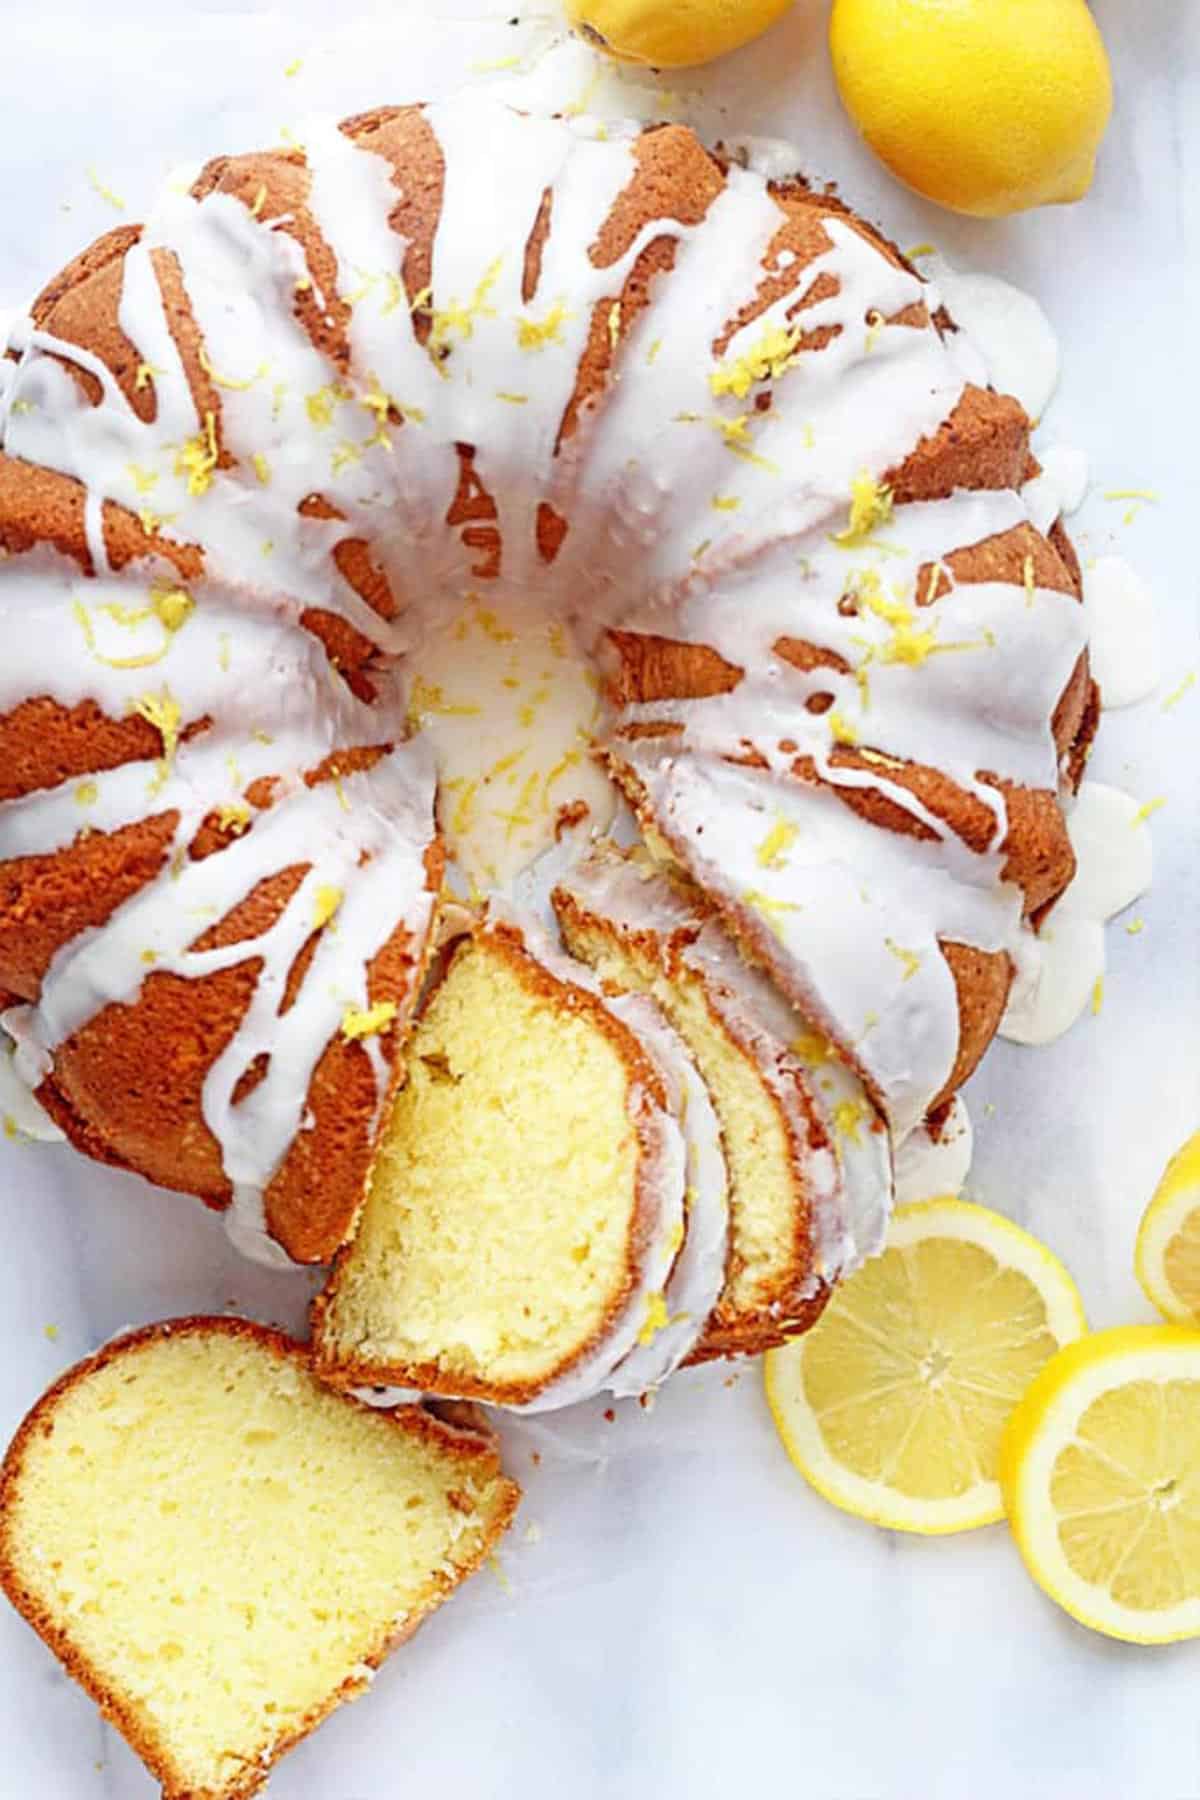 Overhead shot of the Lemon Pound Cake with slices cut out of it and whole lemons and lemon slices next to it. 